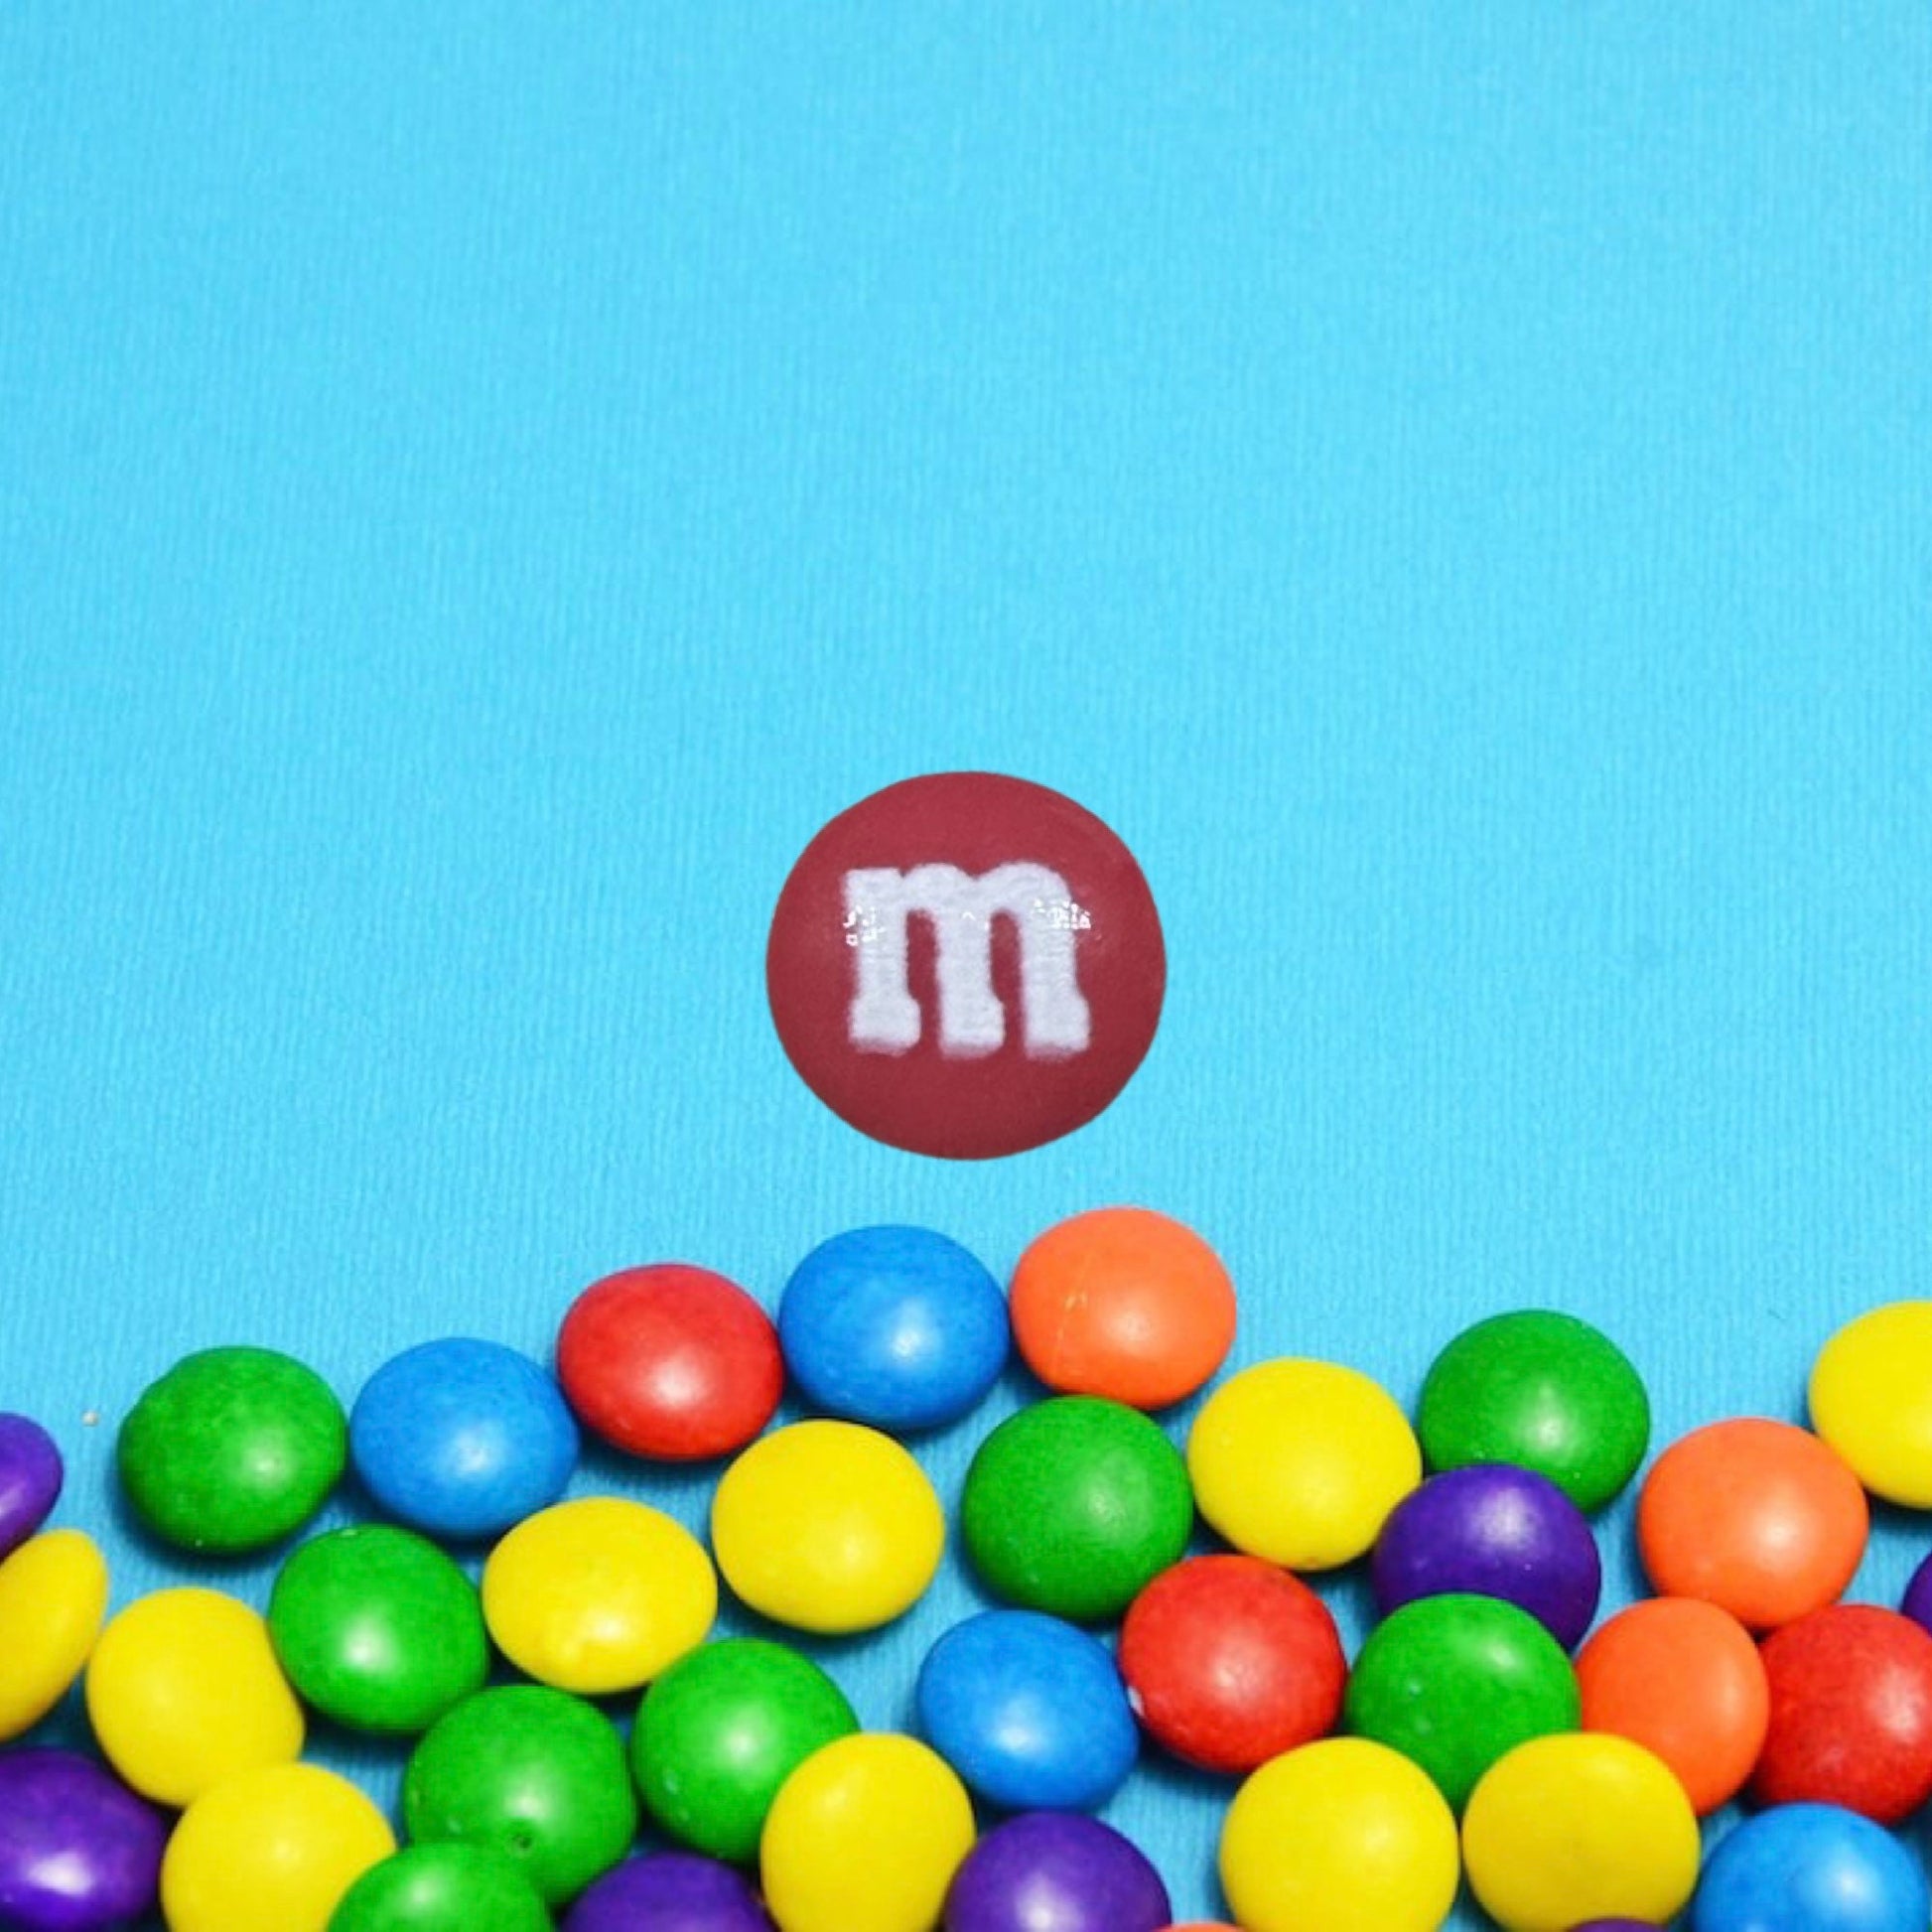 M&M Candy Shoe charms | Chocolate candies | Candy charms | MMs | Colorful candy charms | 3d shoe charms | 3d food | Candies